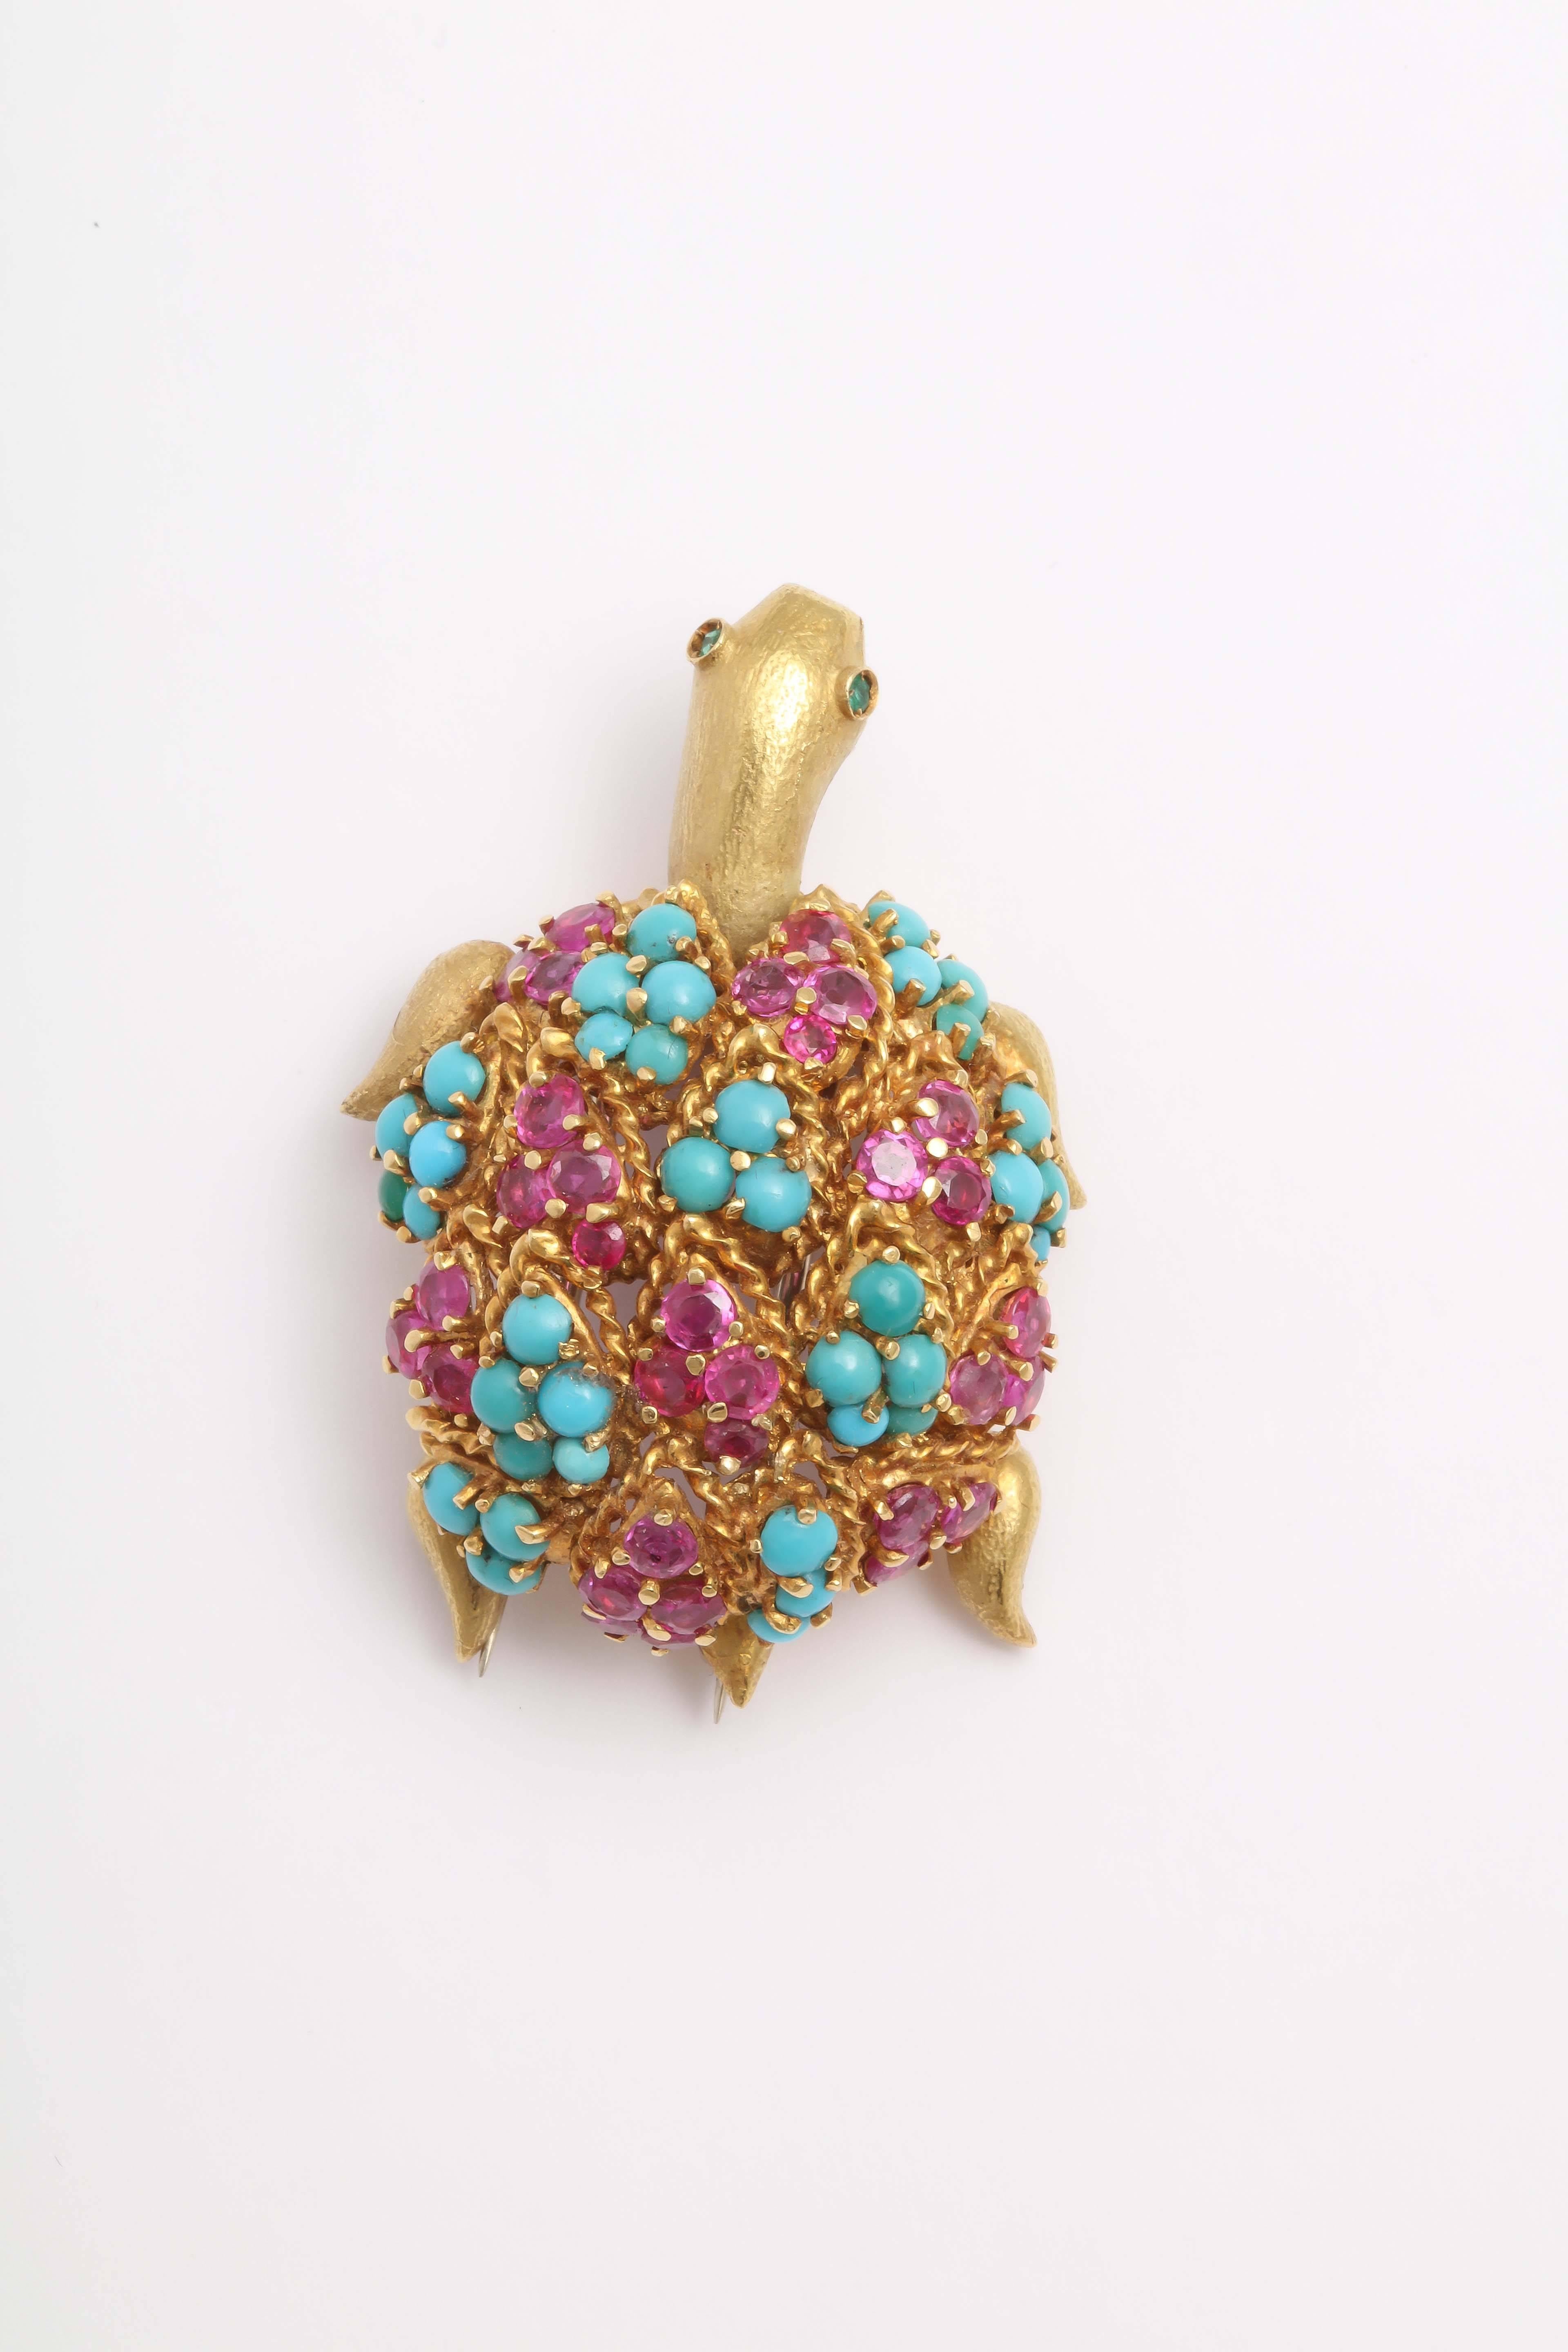 Charming  Bejeweled Turtle Brooch set with a patterned back of prong  set faceted Rubies and Turquoise round beads.
   Perfect to highlight any carefree afternoon or dress up  a very sexy evening.
Double spoke Clip.  Beautifully made - only adding